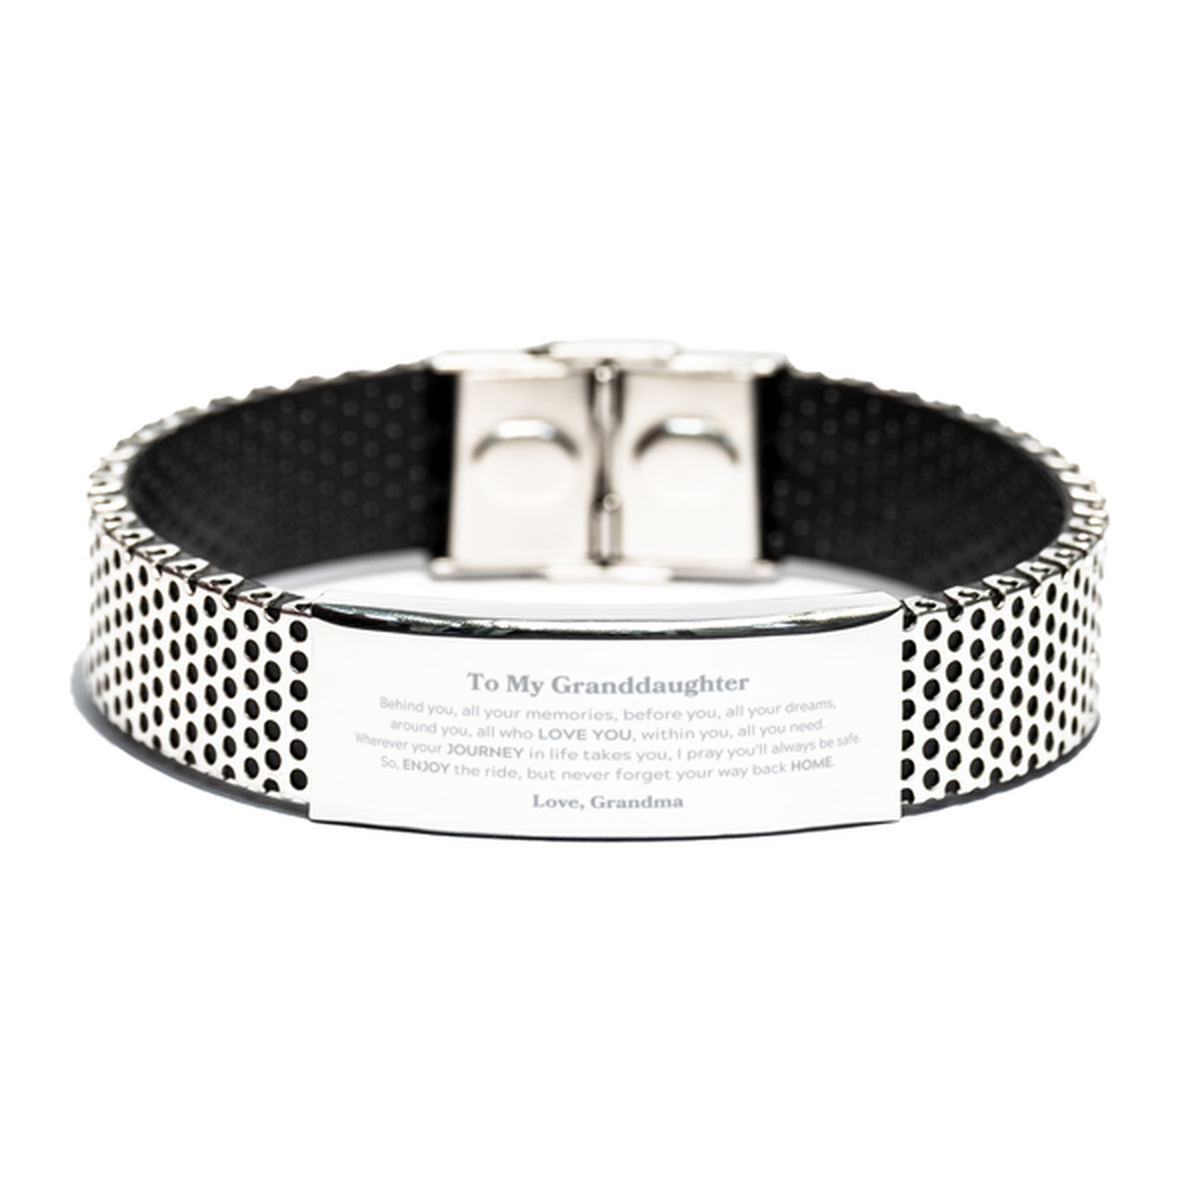 To My Granddaughter Graduation Gifts from Grandma, Granddaughter Stainless Steel Bracelet Christmas Birthday Gifts for Granddaughter Behind you, all your memories, before you, all your dreams. Love, Grandma